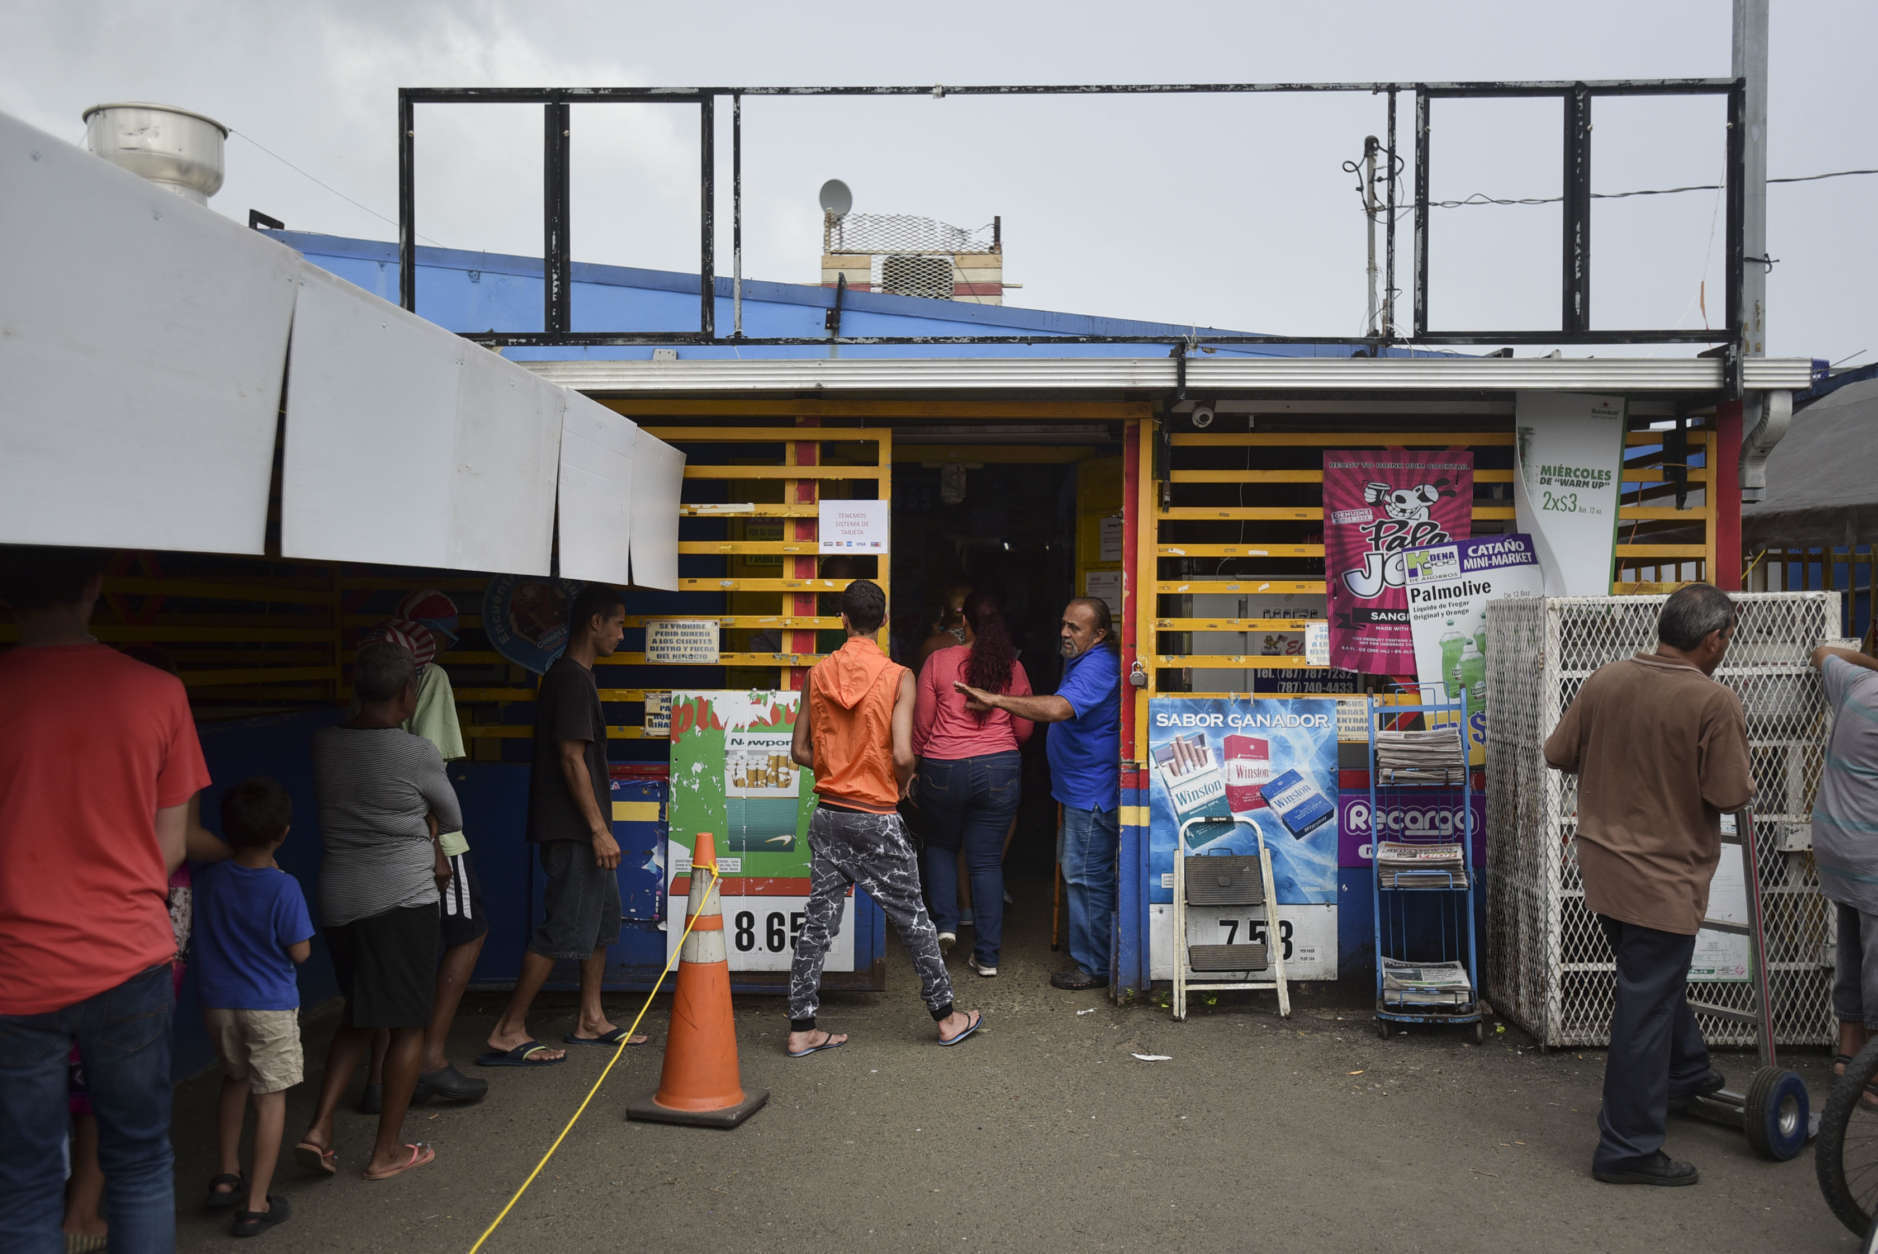 Residents from Juana Matos wait in line to buy groceries at Catano Mini Market in the middle of a supply shortage caused by the passage of Hurricane Maria, in Catano, Puerto Rico, Wednesday, September 27, 2017. The aftermath of the powerful storm has resulted in a near-total shutdown of the Puerto Rican economy that could last for weeks and has many people running seriously low on cash and deeply concerned that it will become even harder to survive on this storm-ravaged island. (AP Photo/Carlos Giusti)